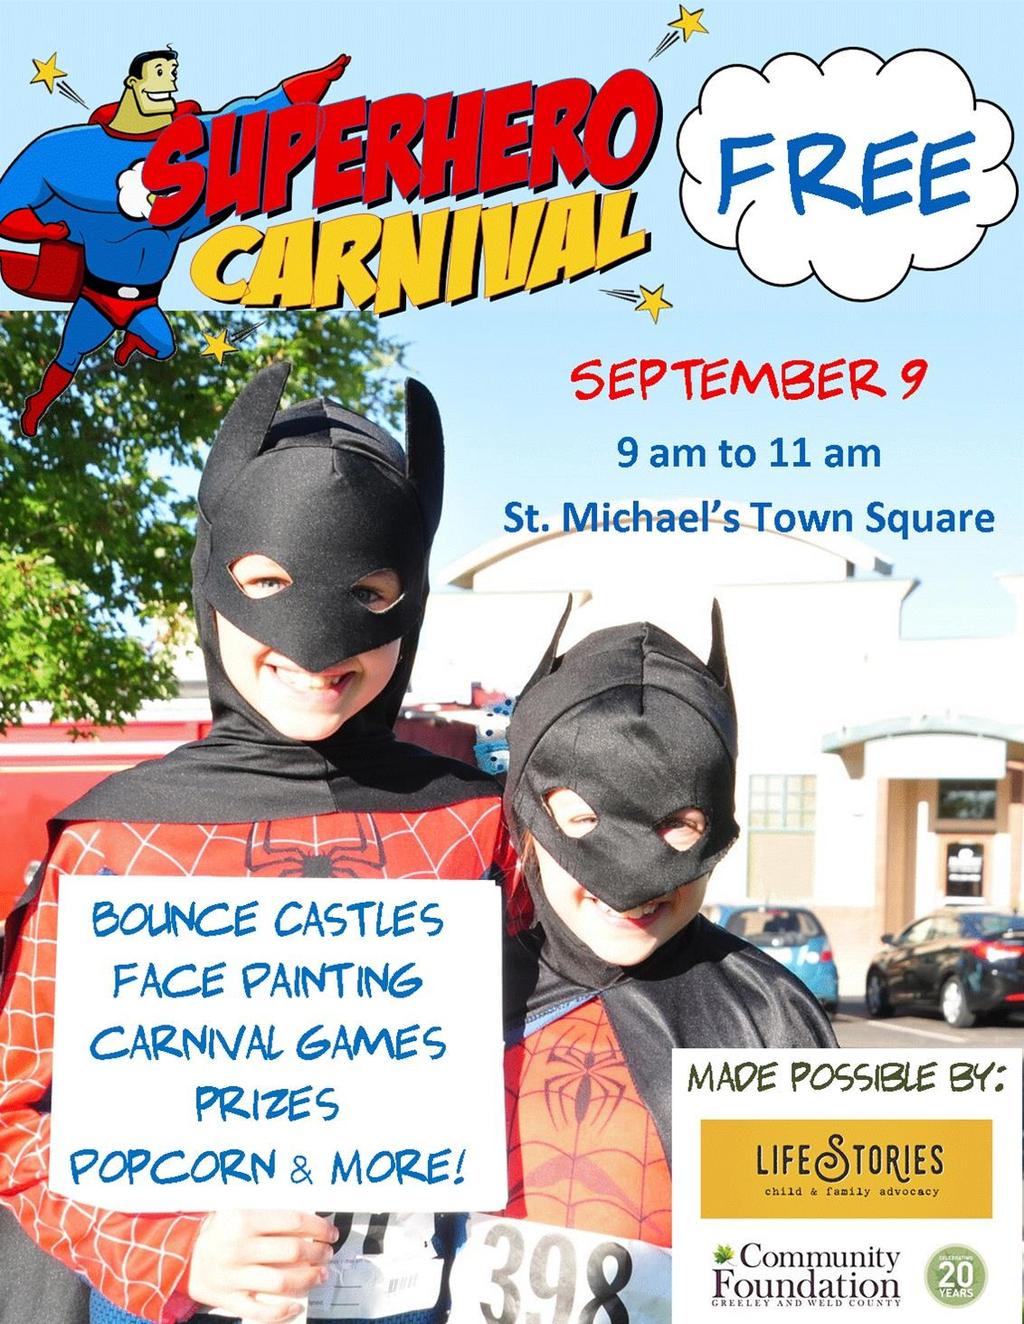 Family Carnival Please join us for festivities for the whole family after the race from 9:00 am to 11:00 am.